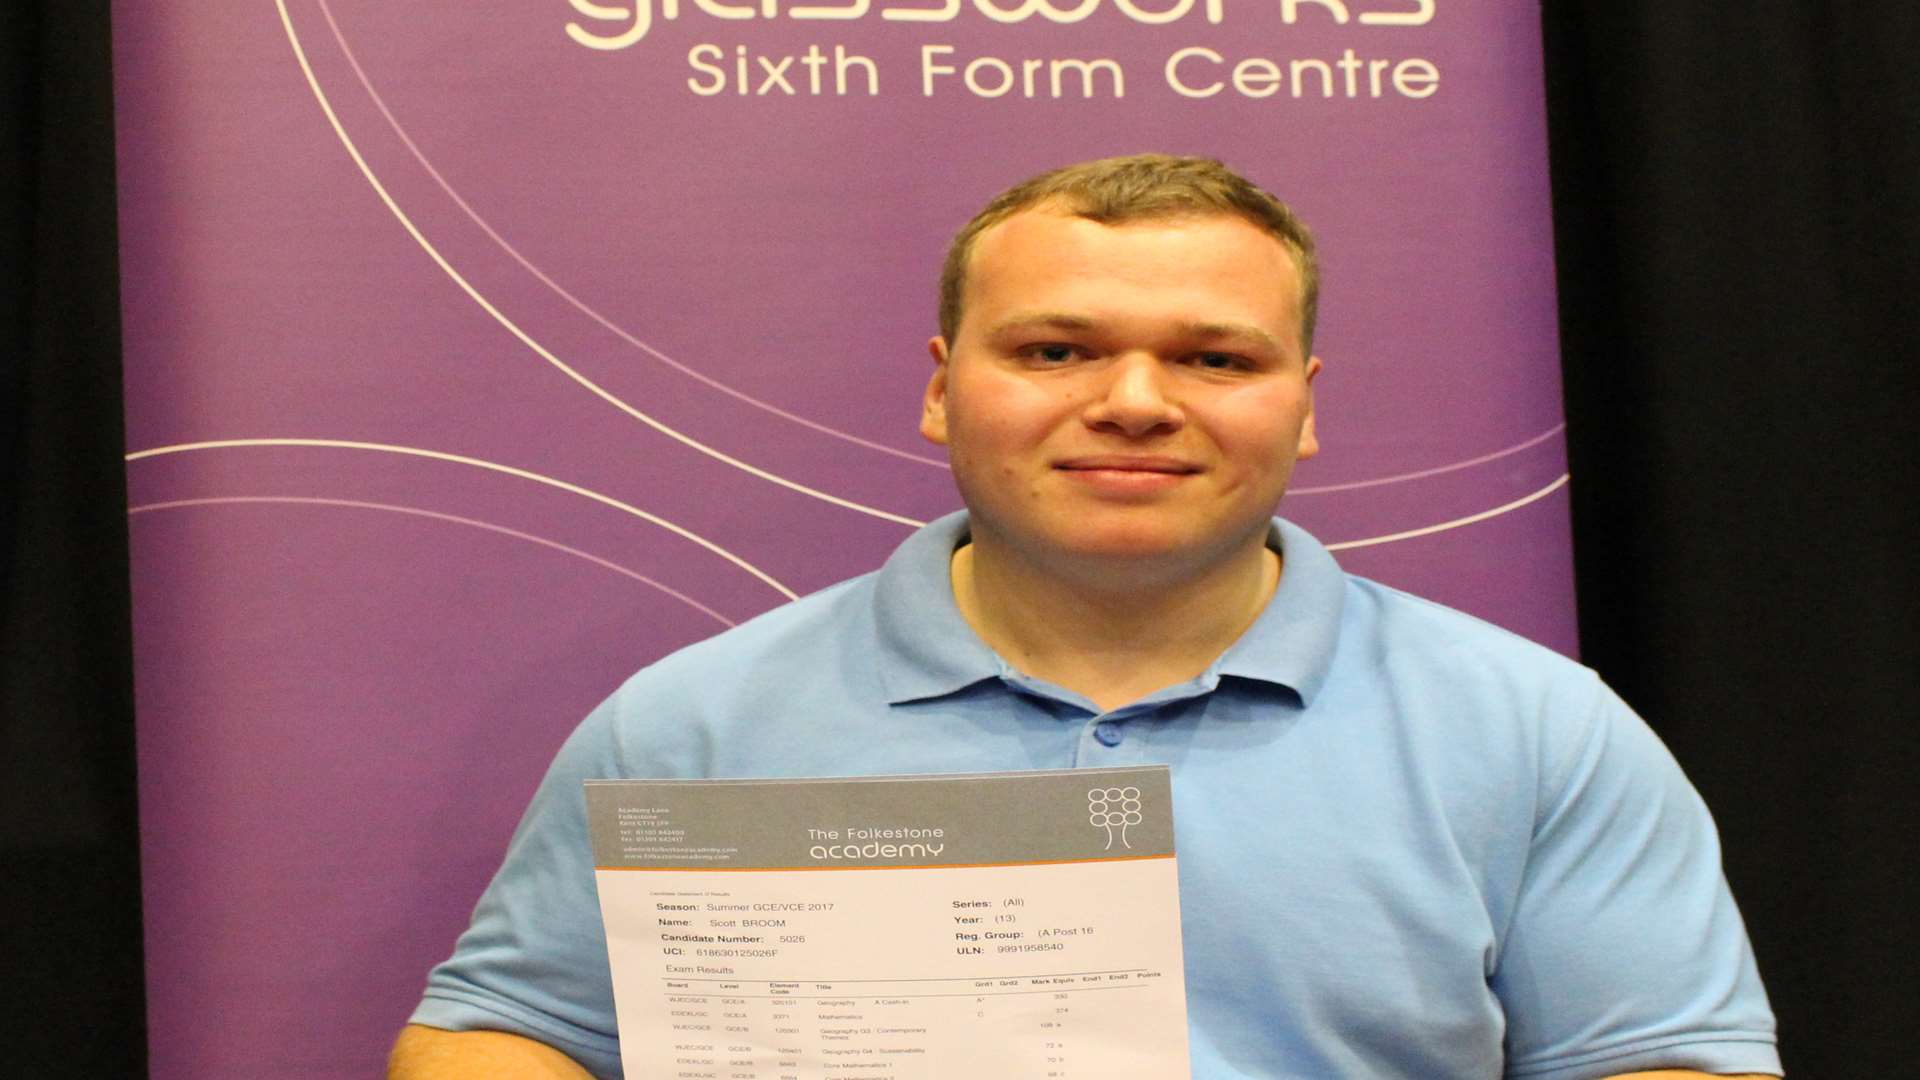 Scott Broom achieved an A*in A Level Geography, a C in A Level Maths, Distinction* in BTEC Business ICT